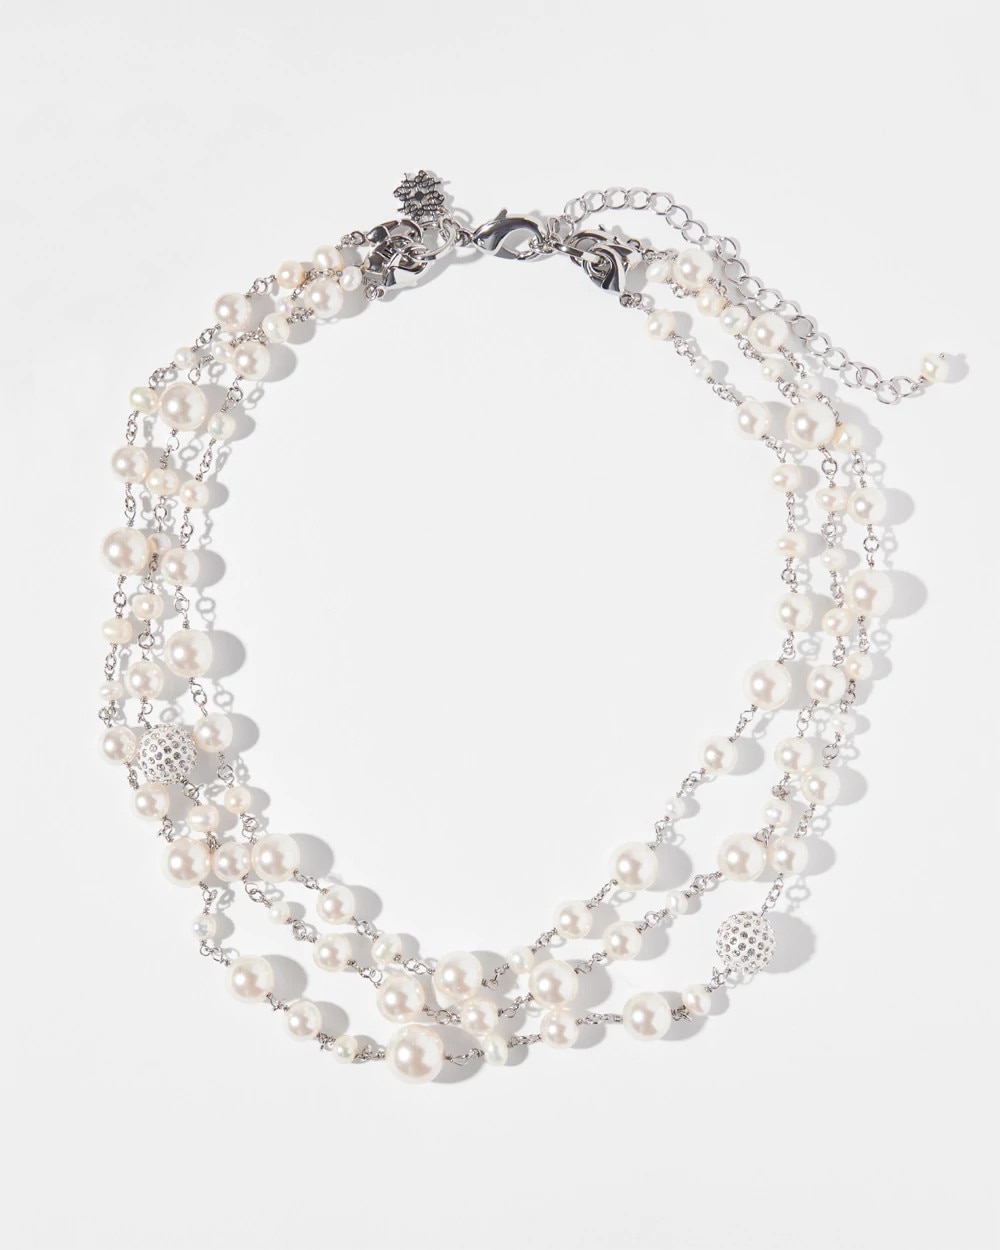 Multi-strand Rubber Statement Necklace with Baroque Pearls - Nyet Jewelry